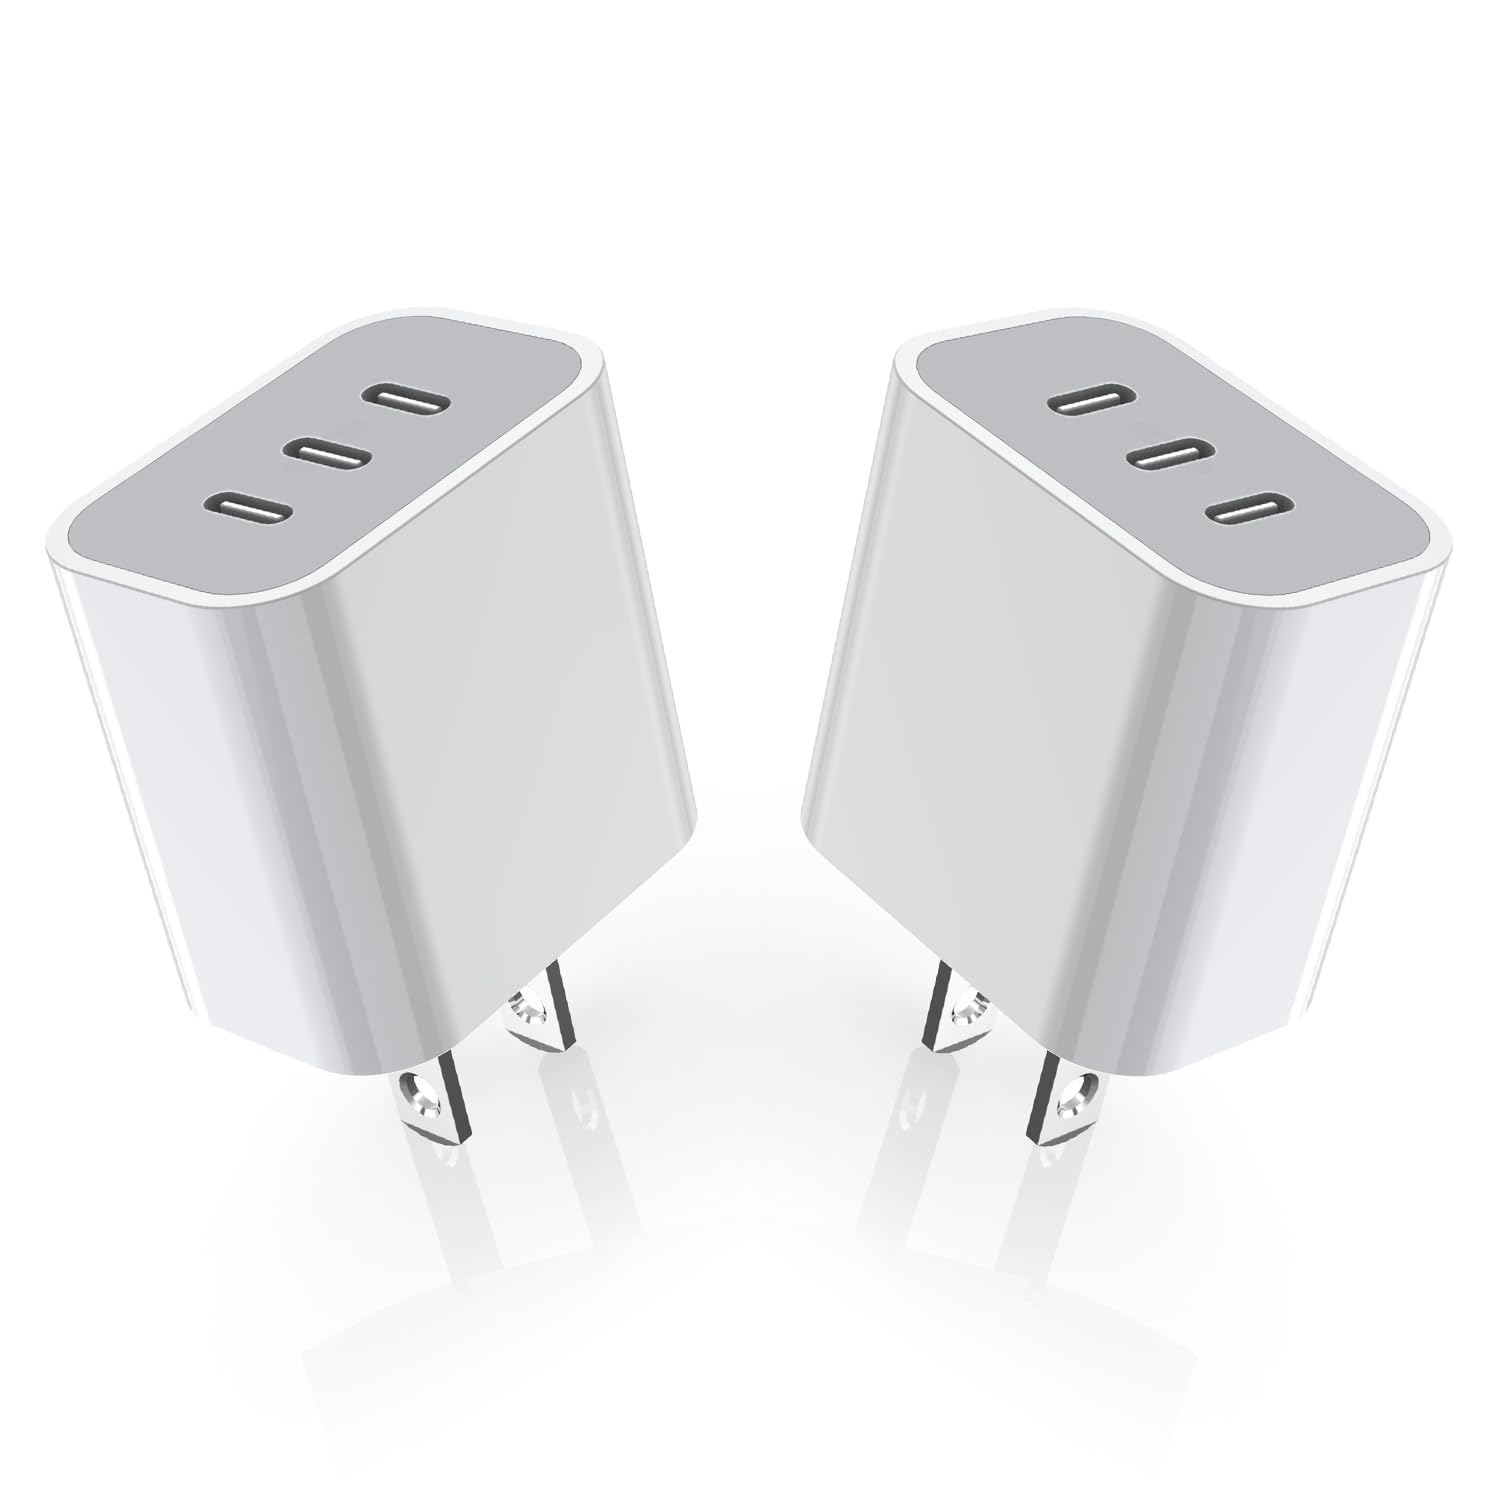 iPhone 15 Charger Block,USB C Charger [2 Pack] 35W 3-Port Wall Charger Fast Type C Charging Block PD Power Adapter for iPhone 15/15 Pro Max/14/14Pro/13/13 Mini/12 Pro Max/XR/SE, iPad,Galaxy,Pixel 4/3